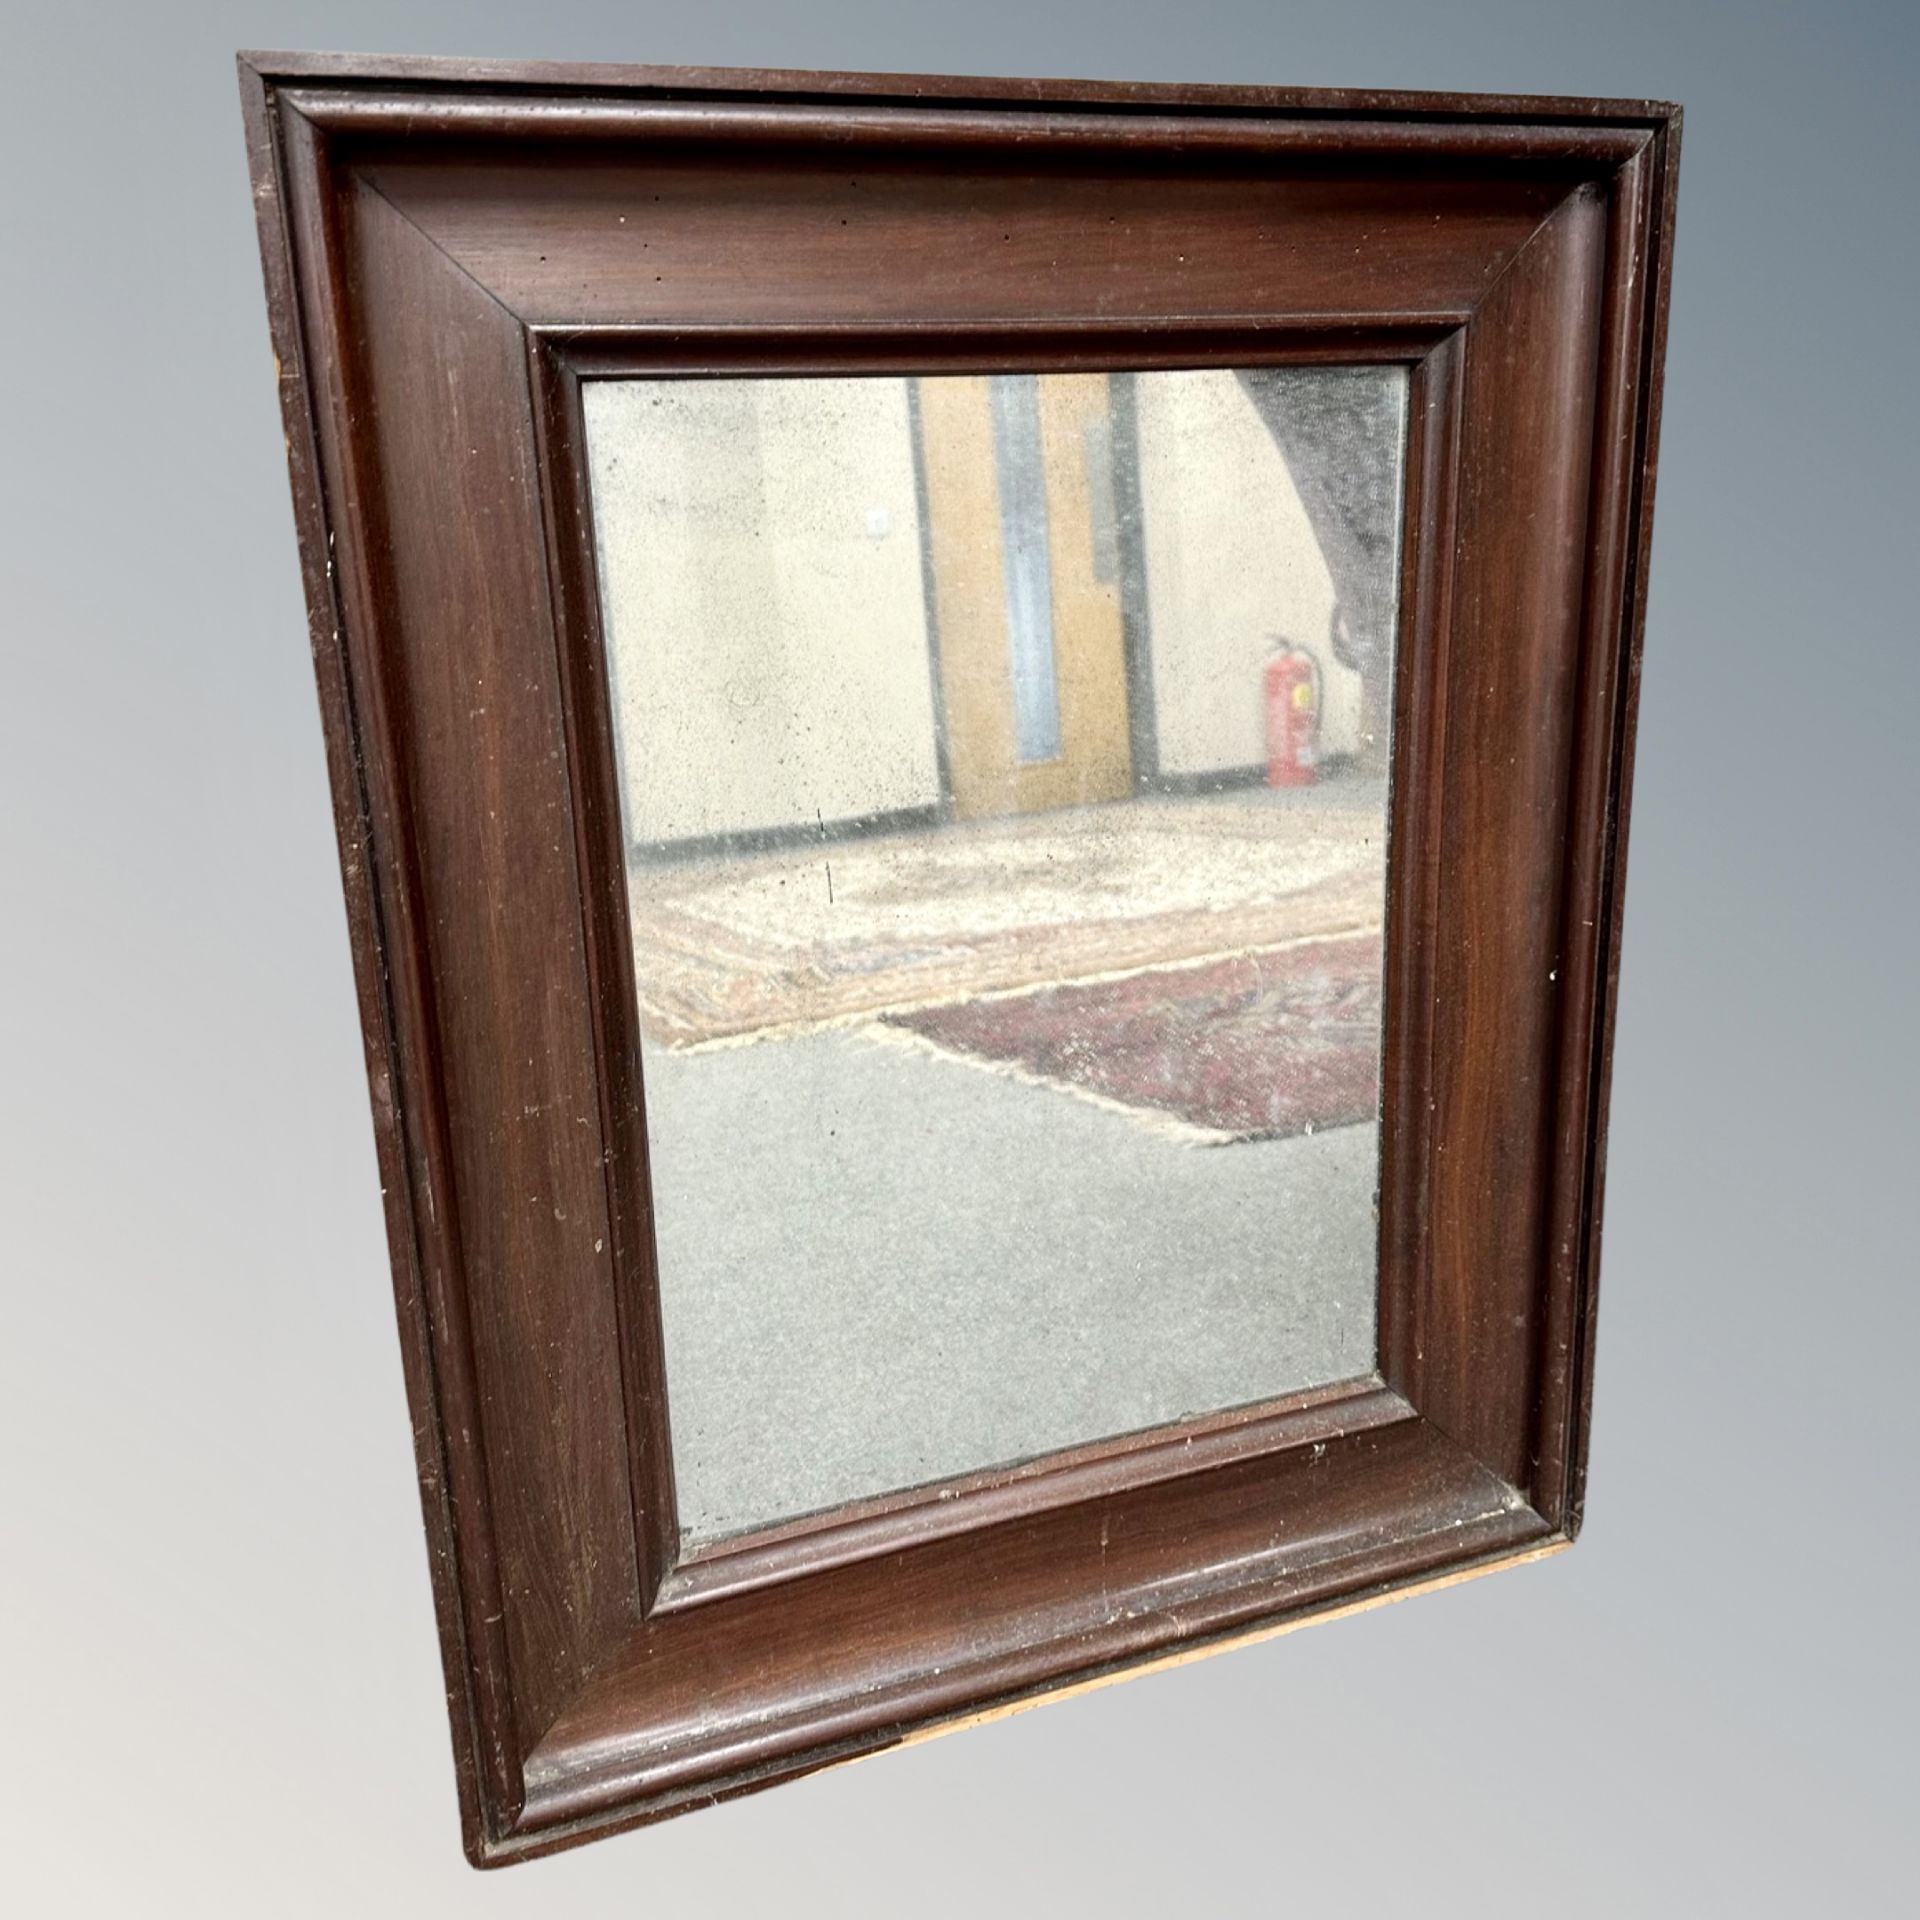 Two 19th century mahogany mirrors (oval mirror 48cm by 74cm, - Image 2 of 2